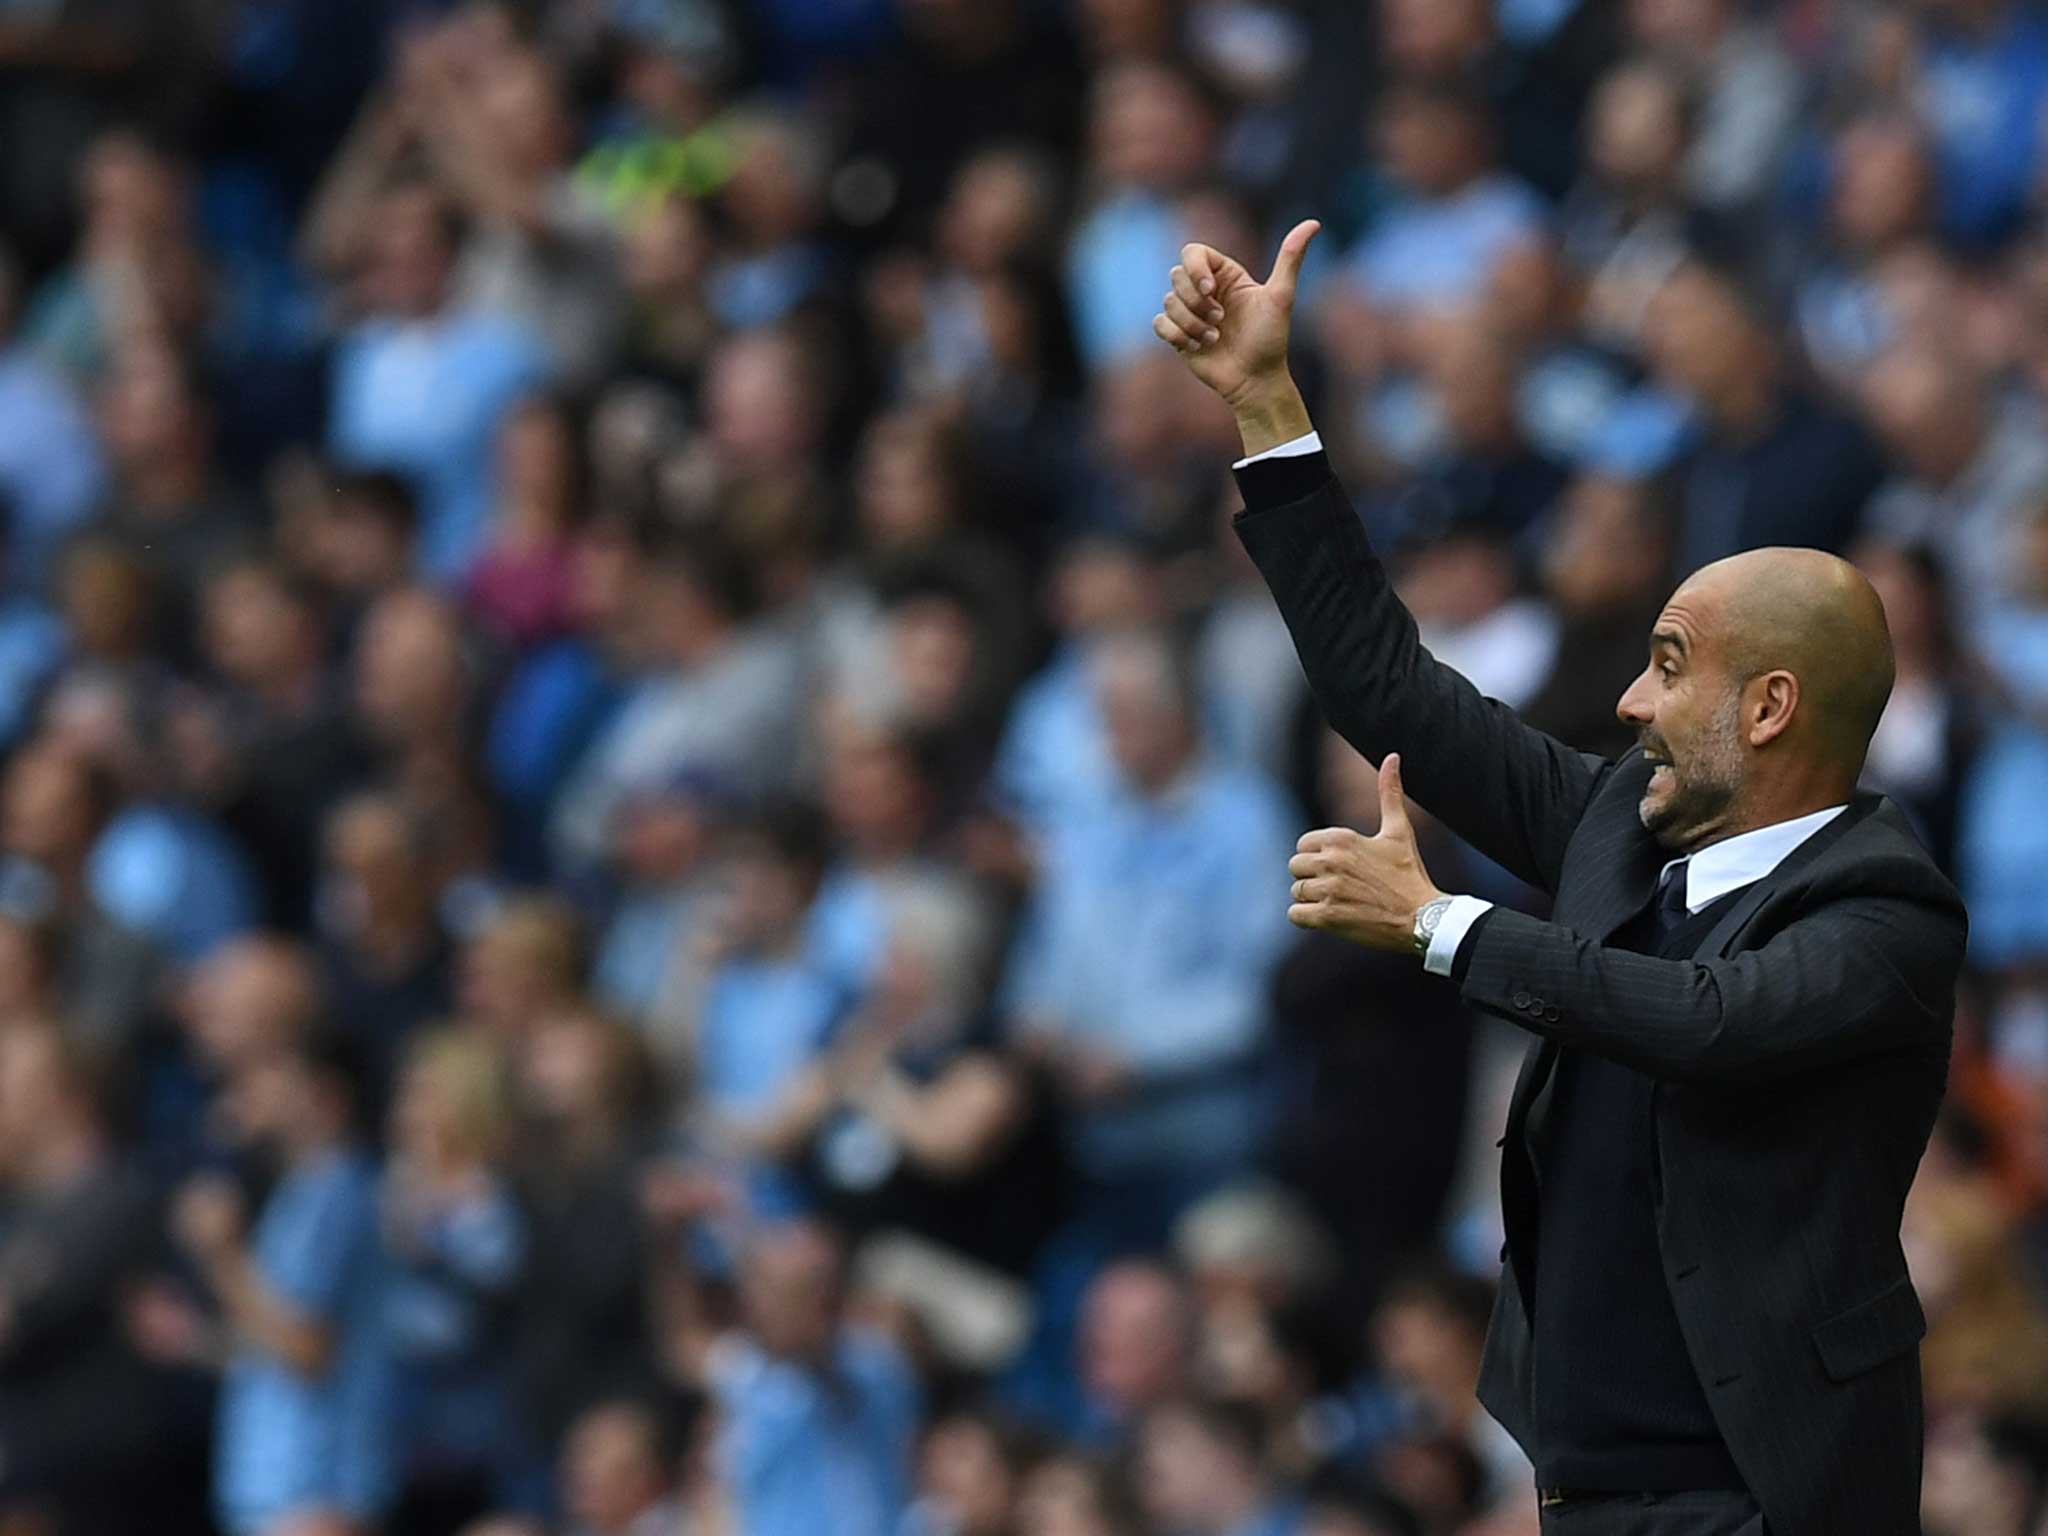 Pep Guardiola on the side-lines during Manchester City's win against Sunderland